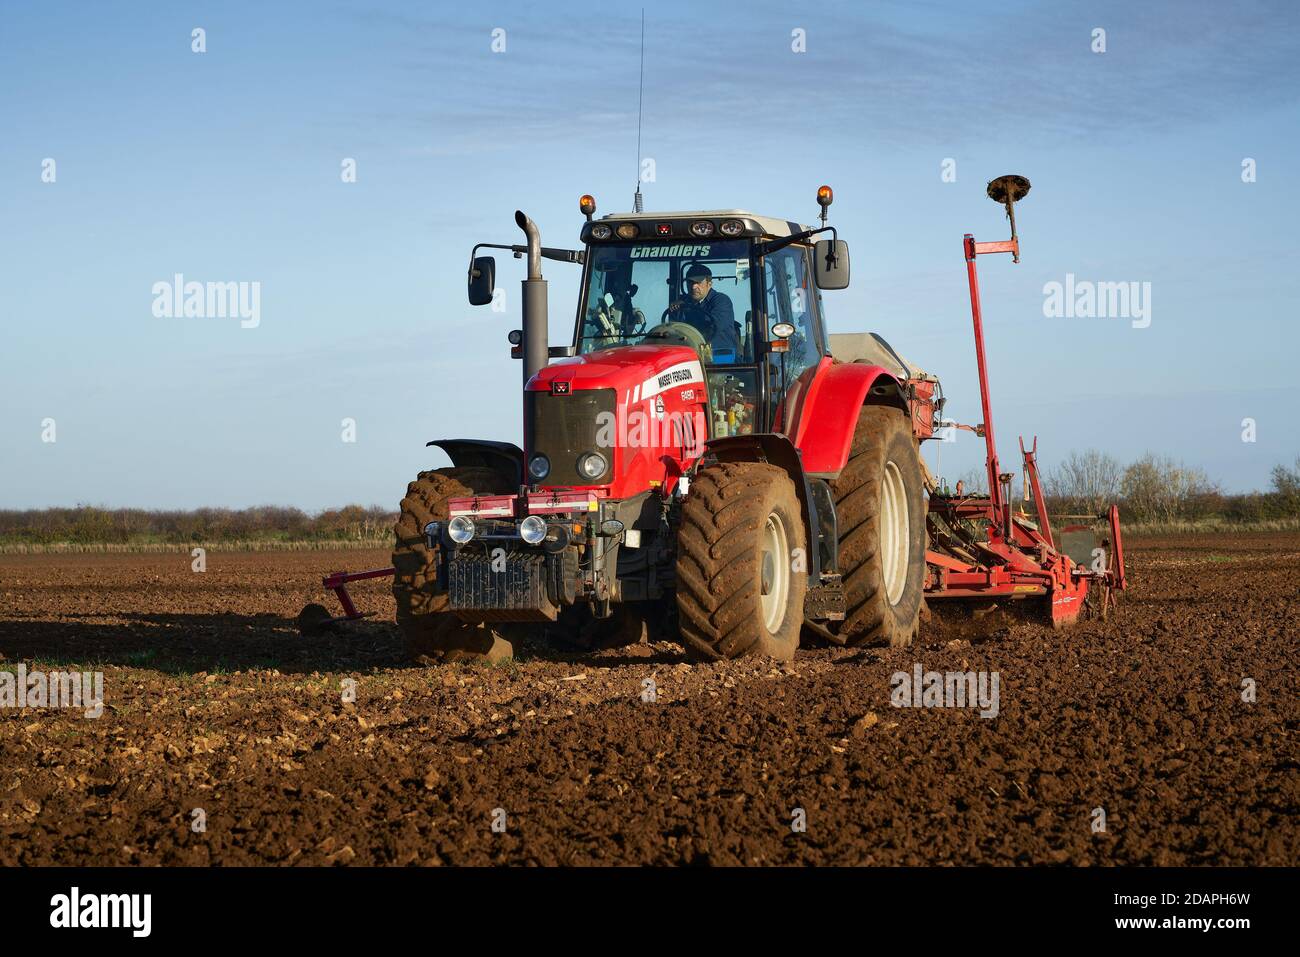 Red Massey Ferguson tractor cultivating field sowing winter cereal crop via power harrow combination drill Stock Photo